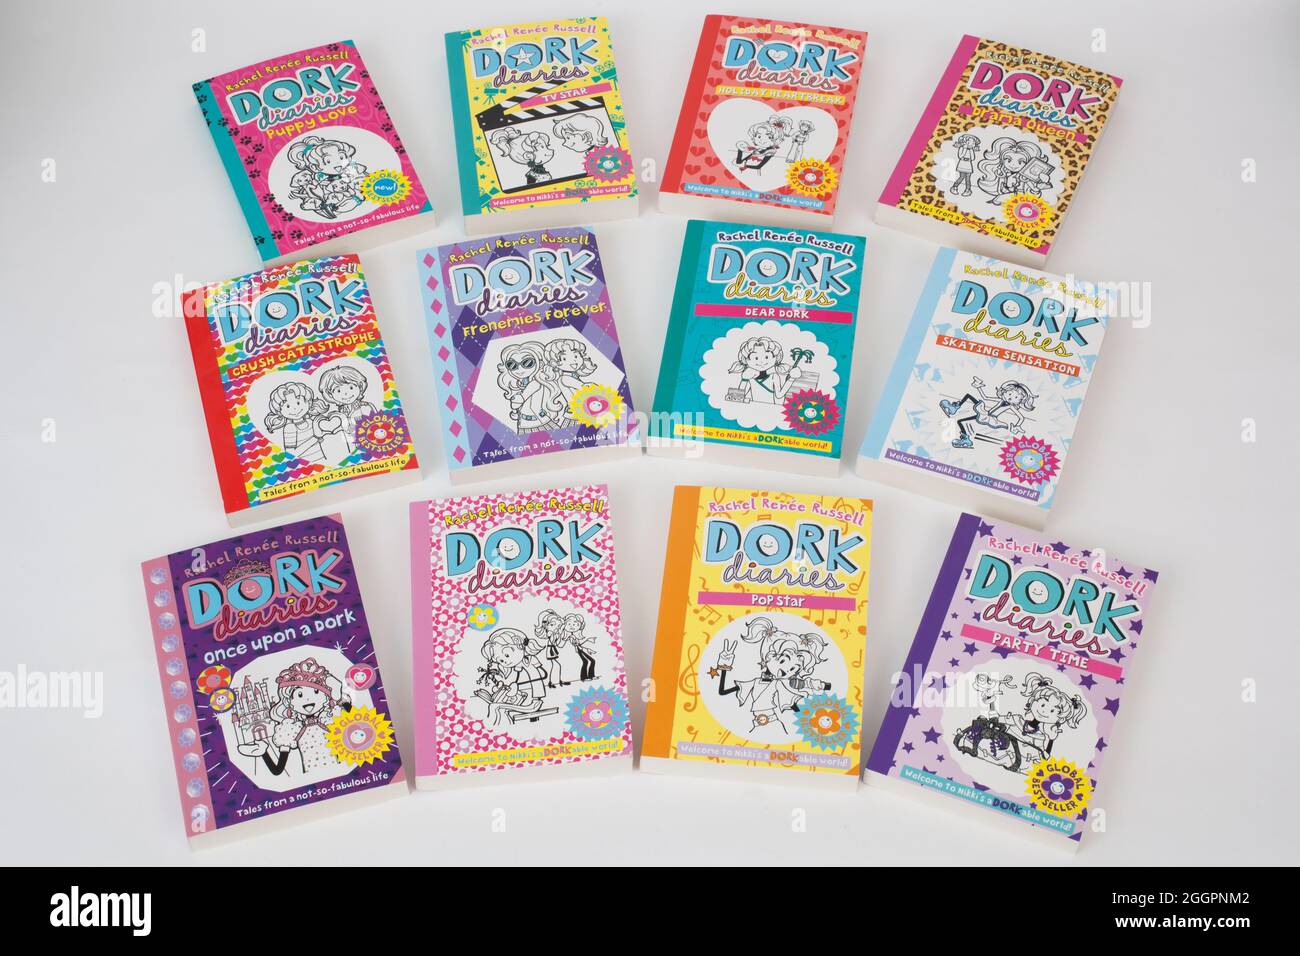 The Dork Diaries collection of books by Rachel Renee Russell Stock Photo